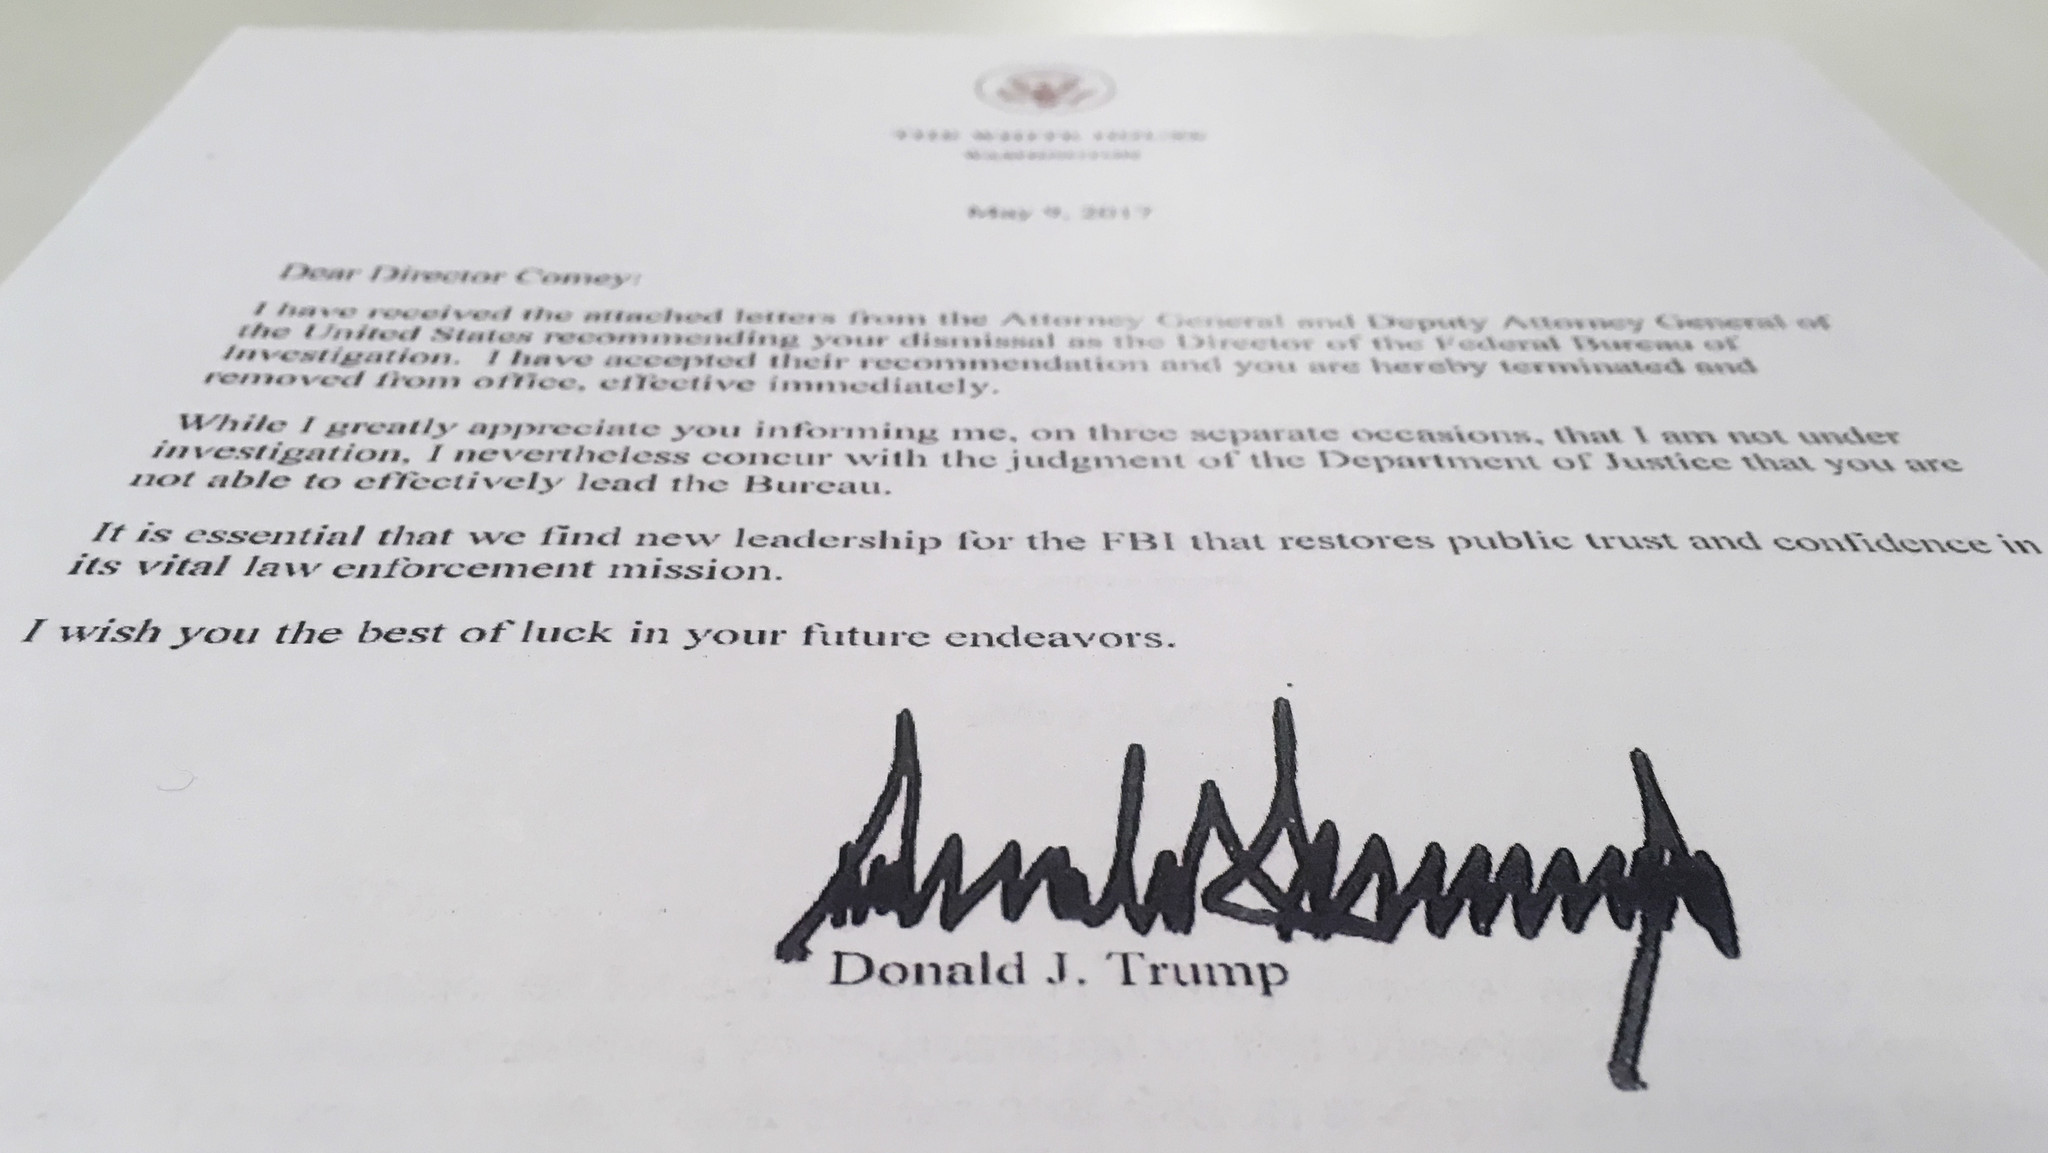 The termination letter from President Trump to FBI Director James B. Comey.